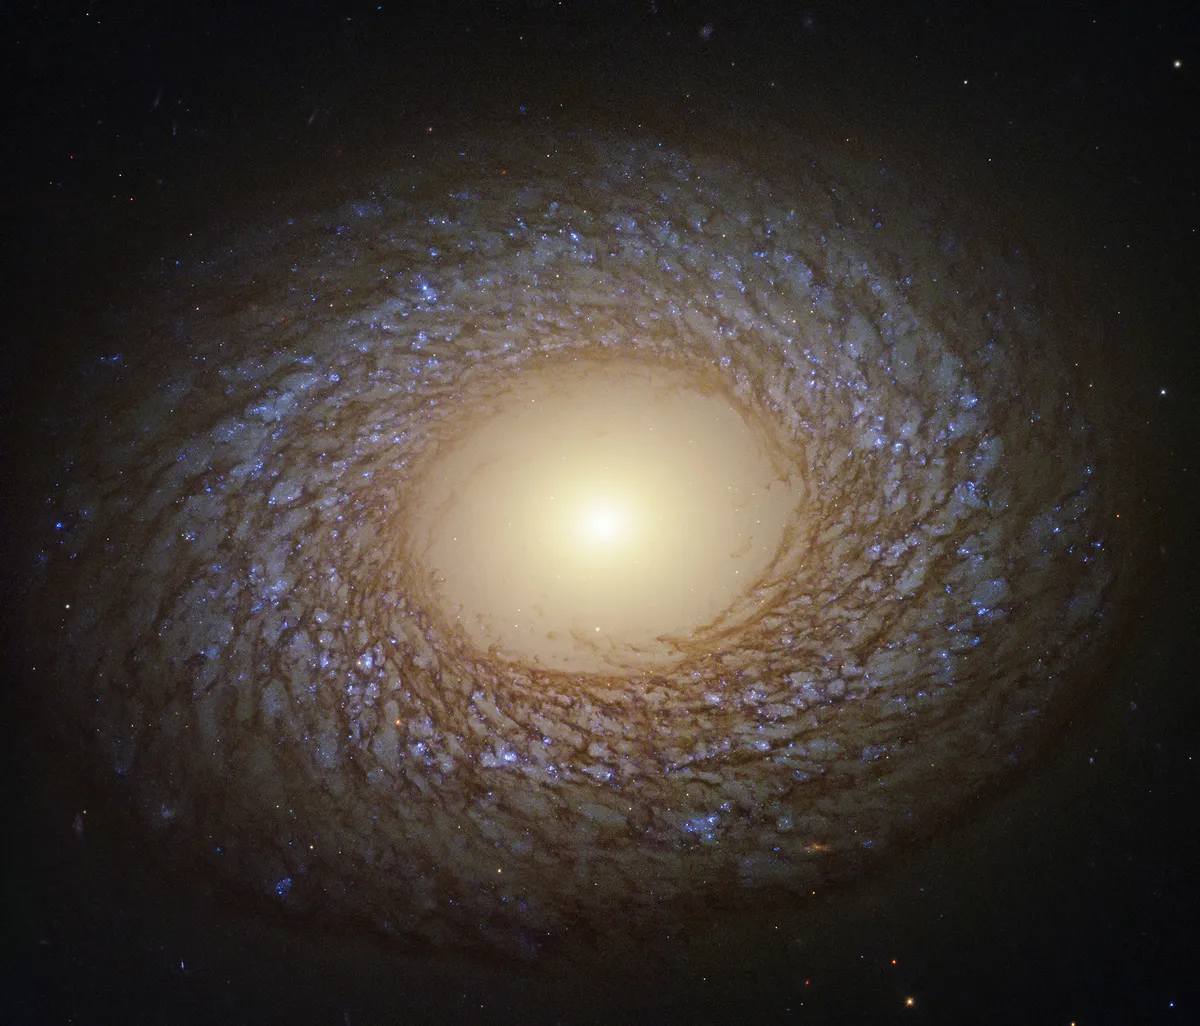 Galaxy NGC 2775, by the Hubble Space Telescope. Credit: ESA/Hubble & NASA/J. Lee and the PHANGS-HST Team; Acknowledgment: Judy Schmidt (Geckzilla)